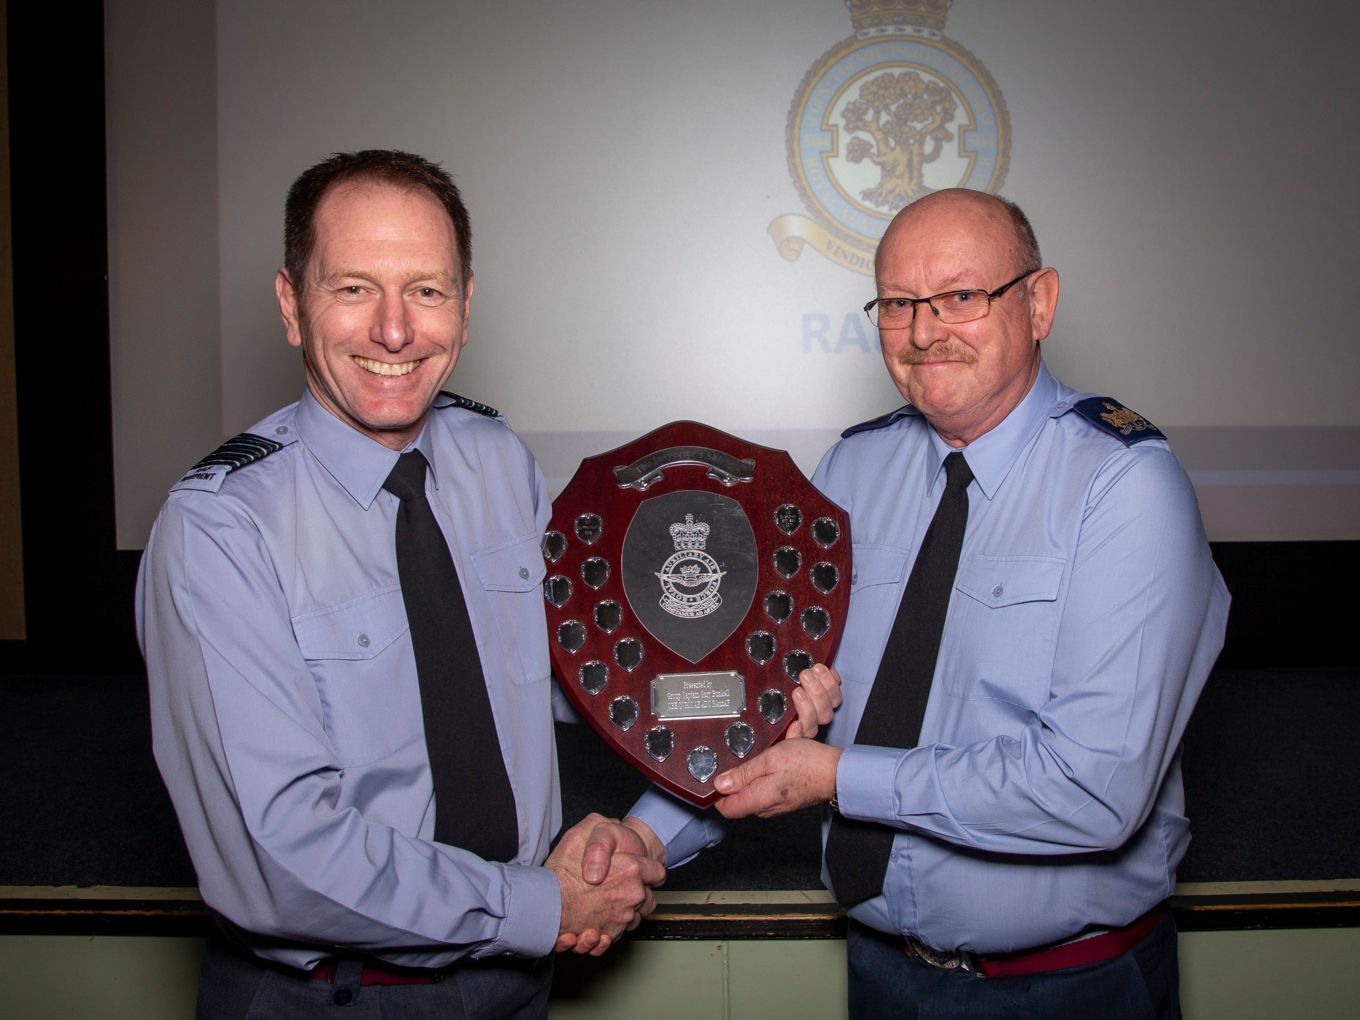 Warrant Officer Sweeney Jarvis receives the Inspector’s Shield from Group Captain Gavin Hellard.